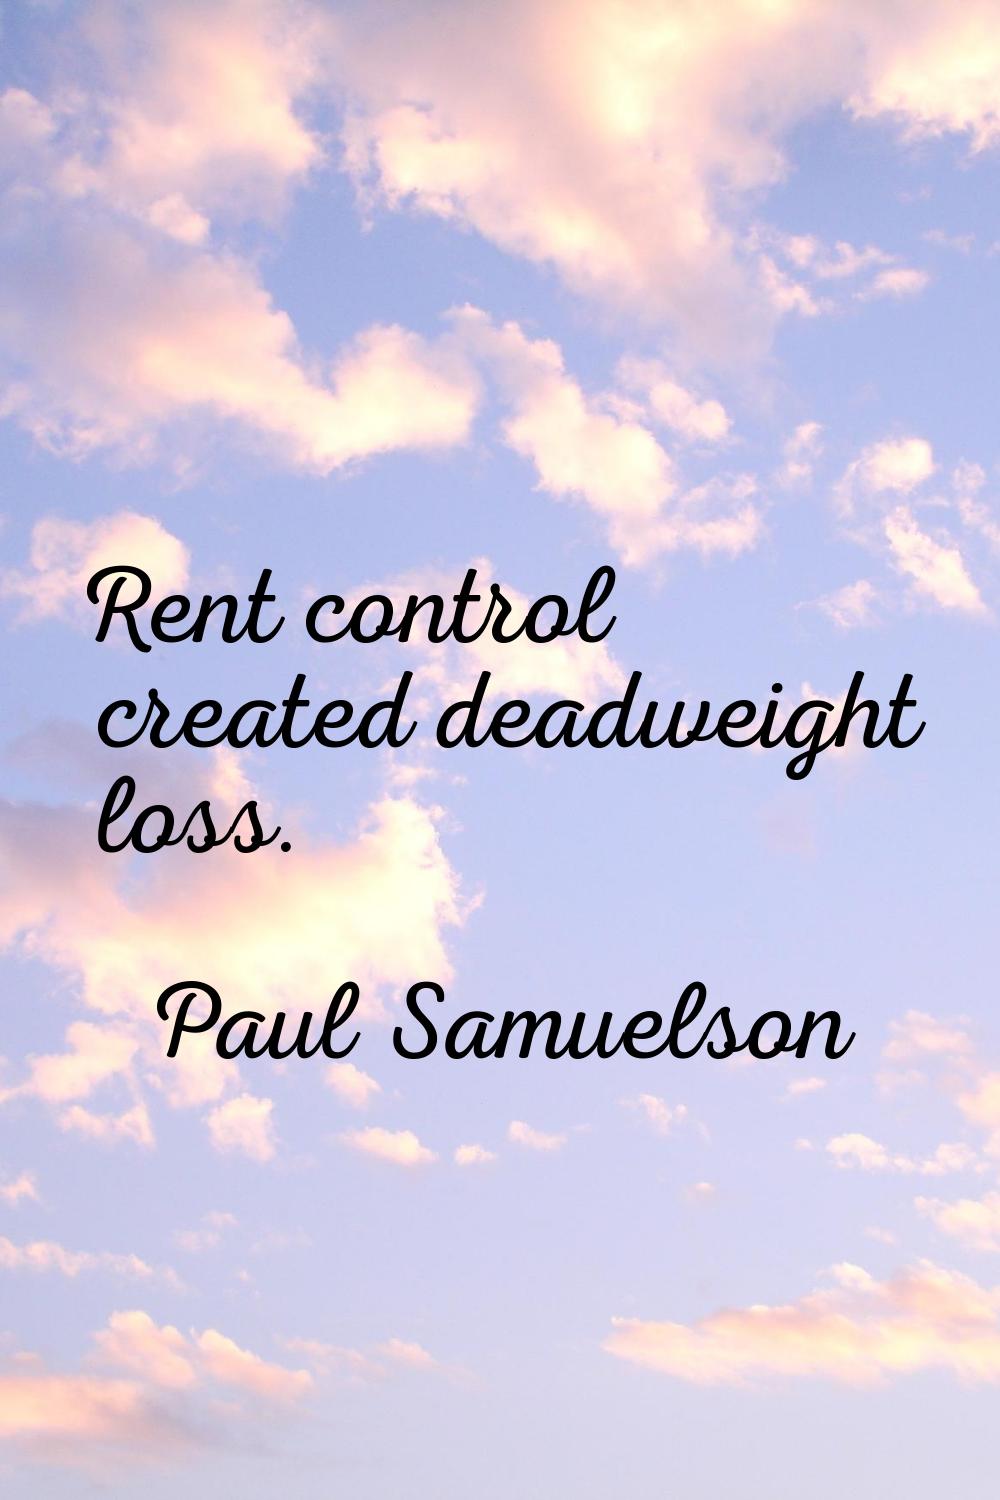 Rent control created deadweight loss.